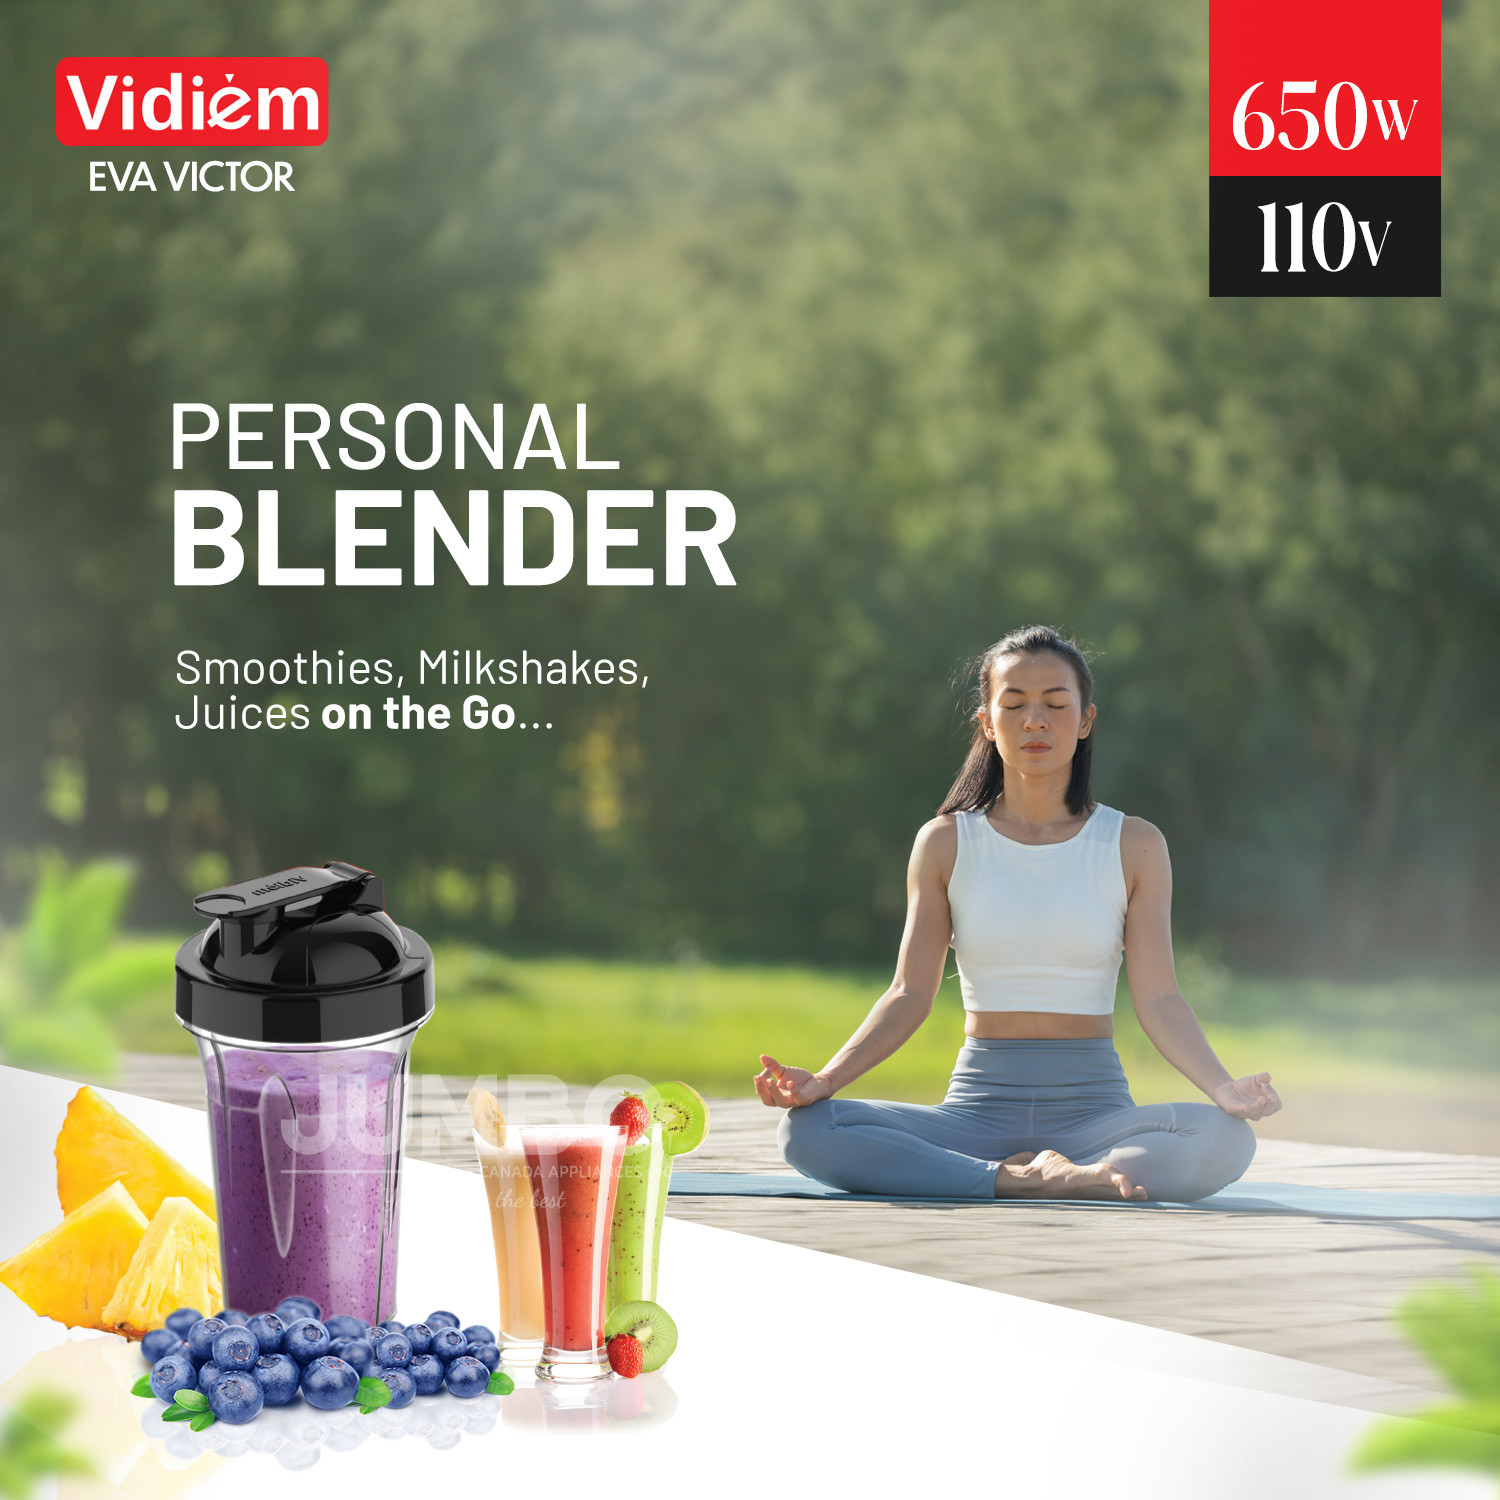 vidiem-eva-victor-pro-650w-110v-indian-mixer-grinder-ss-jars-250ml-spice-personal-coffee-herbs-grinder-with-500ml-personal-juices-shakes-smoothie-blender-made-for-canada-usa3